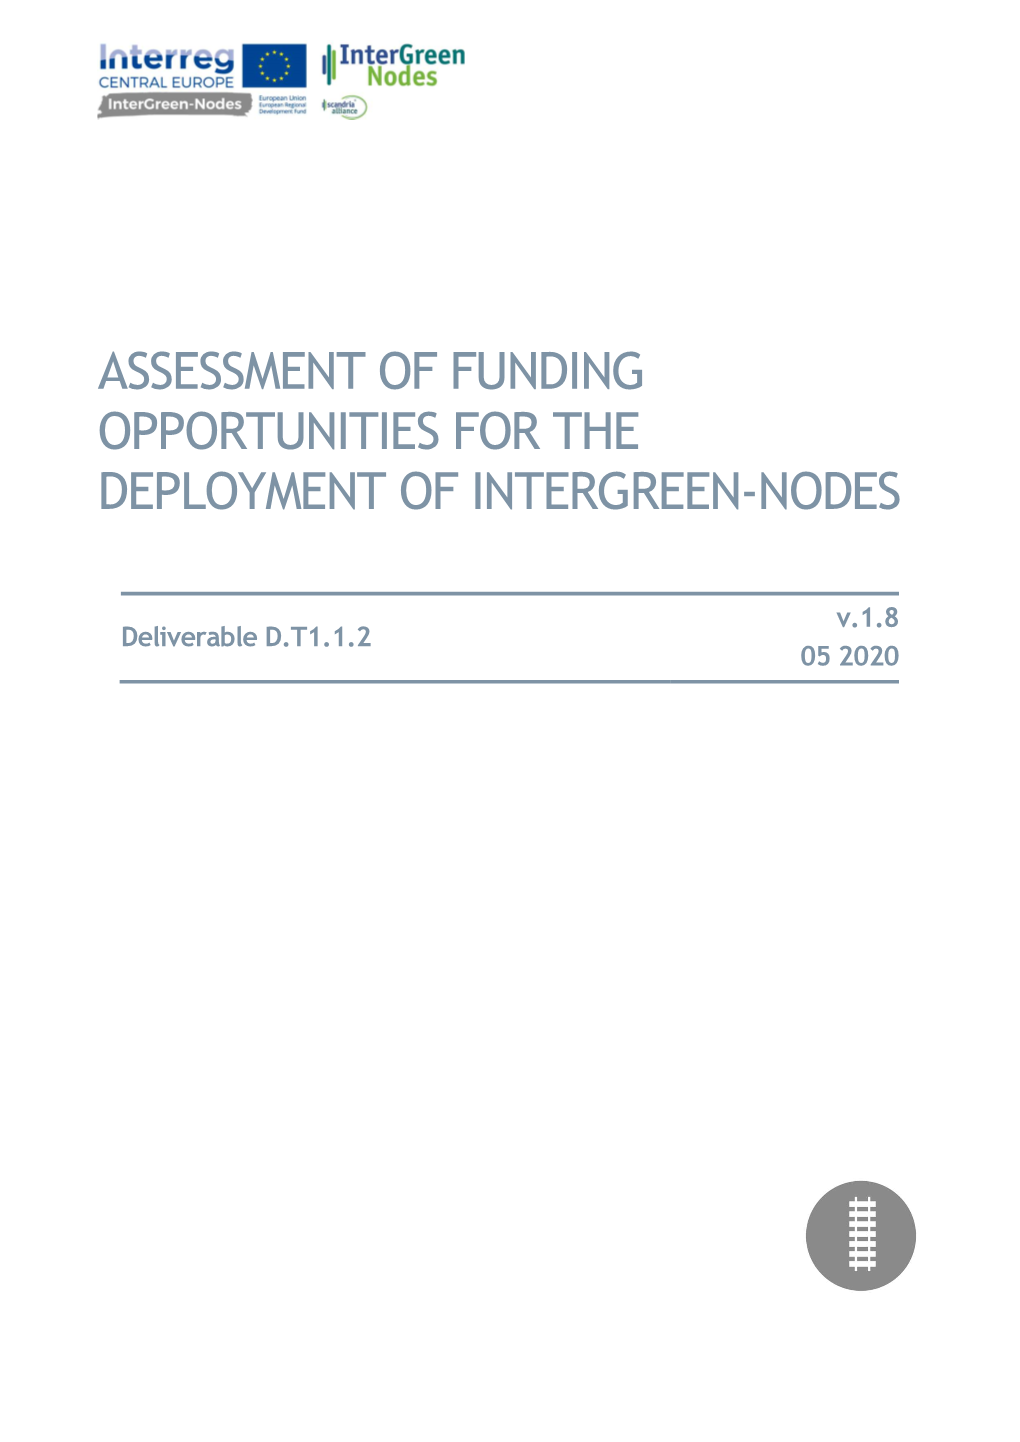 Assessment of Funding Opportunities for the Deployment of Intergreen-Nodes